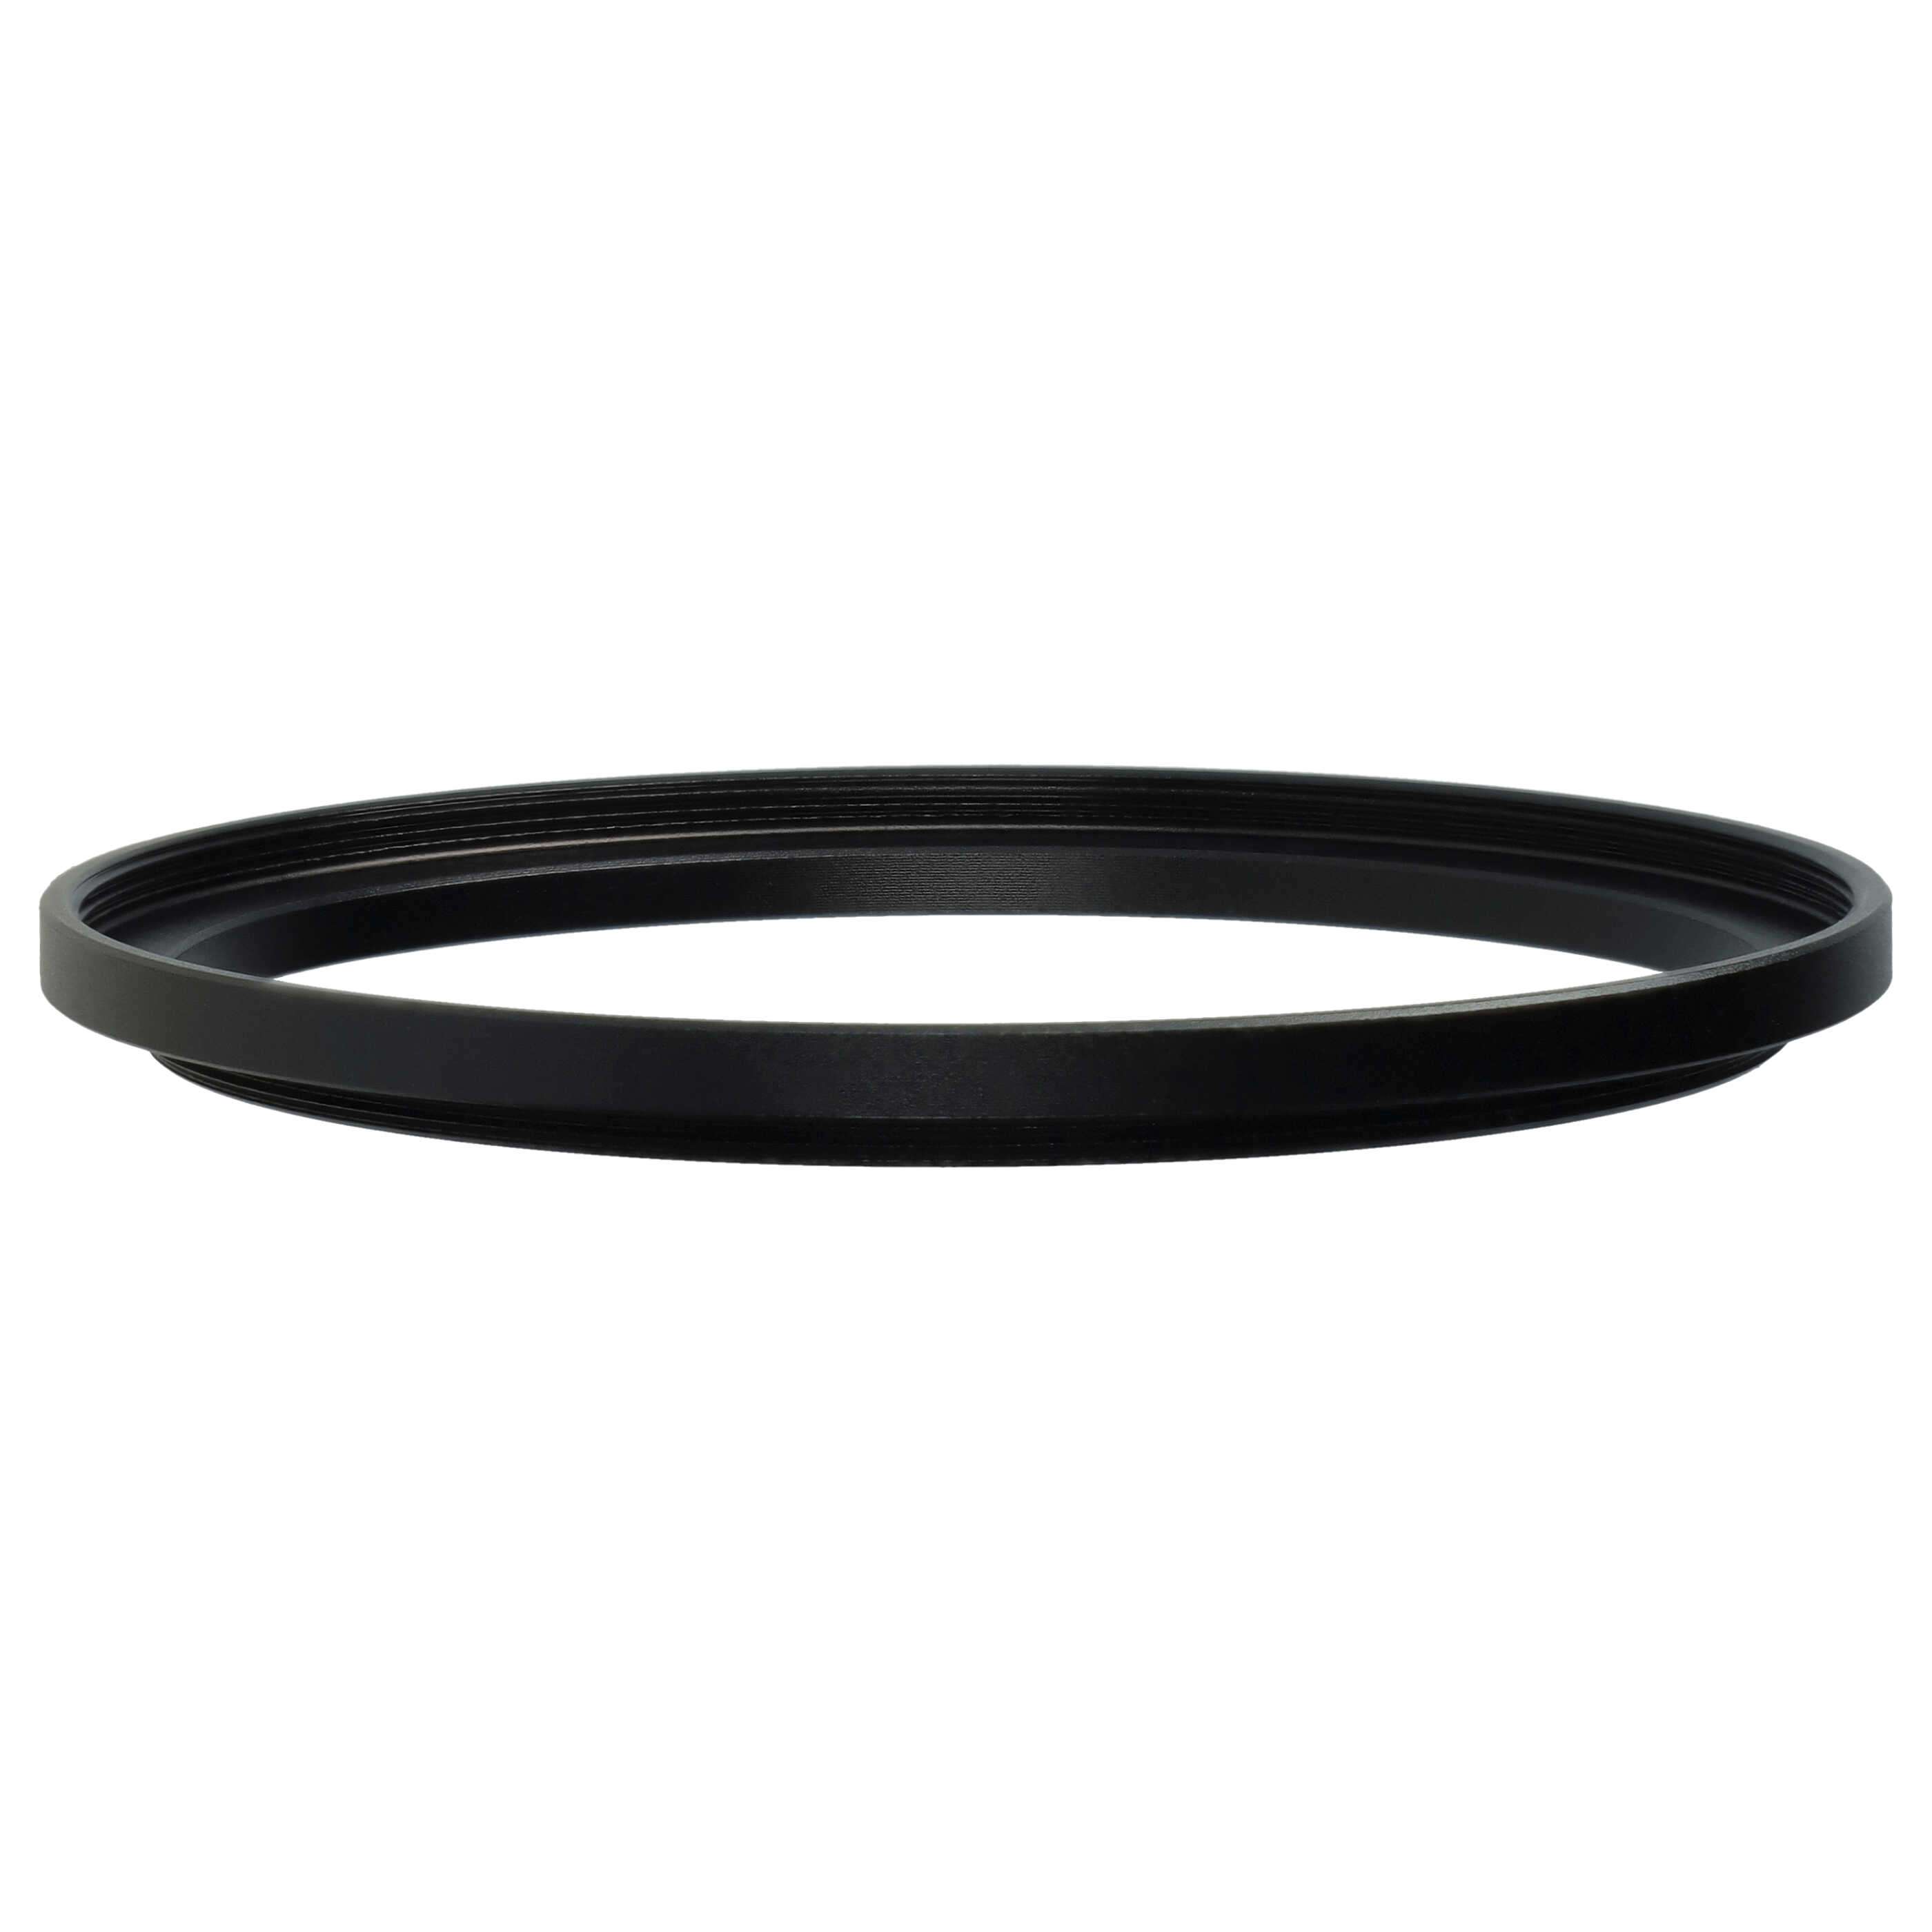 Step-Up Ring Adapter of 67 mm to 72 mmfor various Camera Lens - Filter Adapter